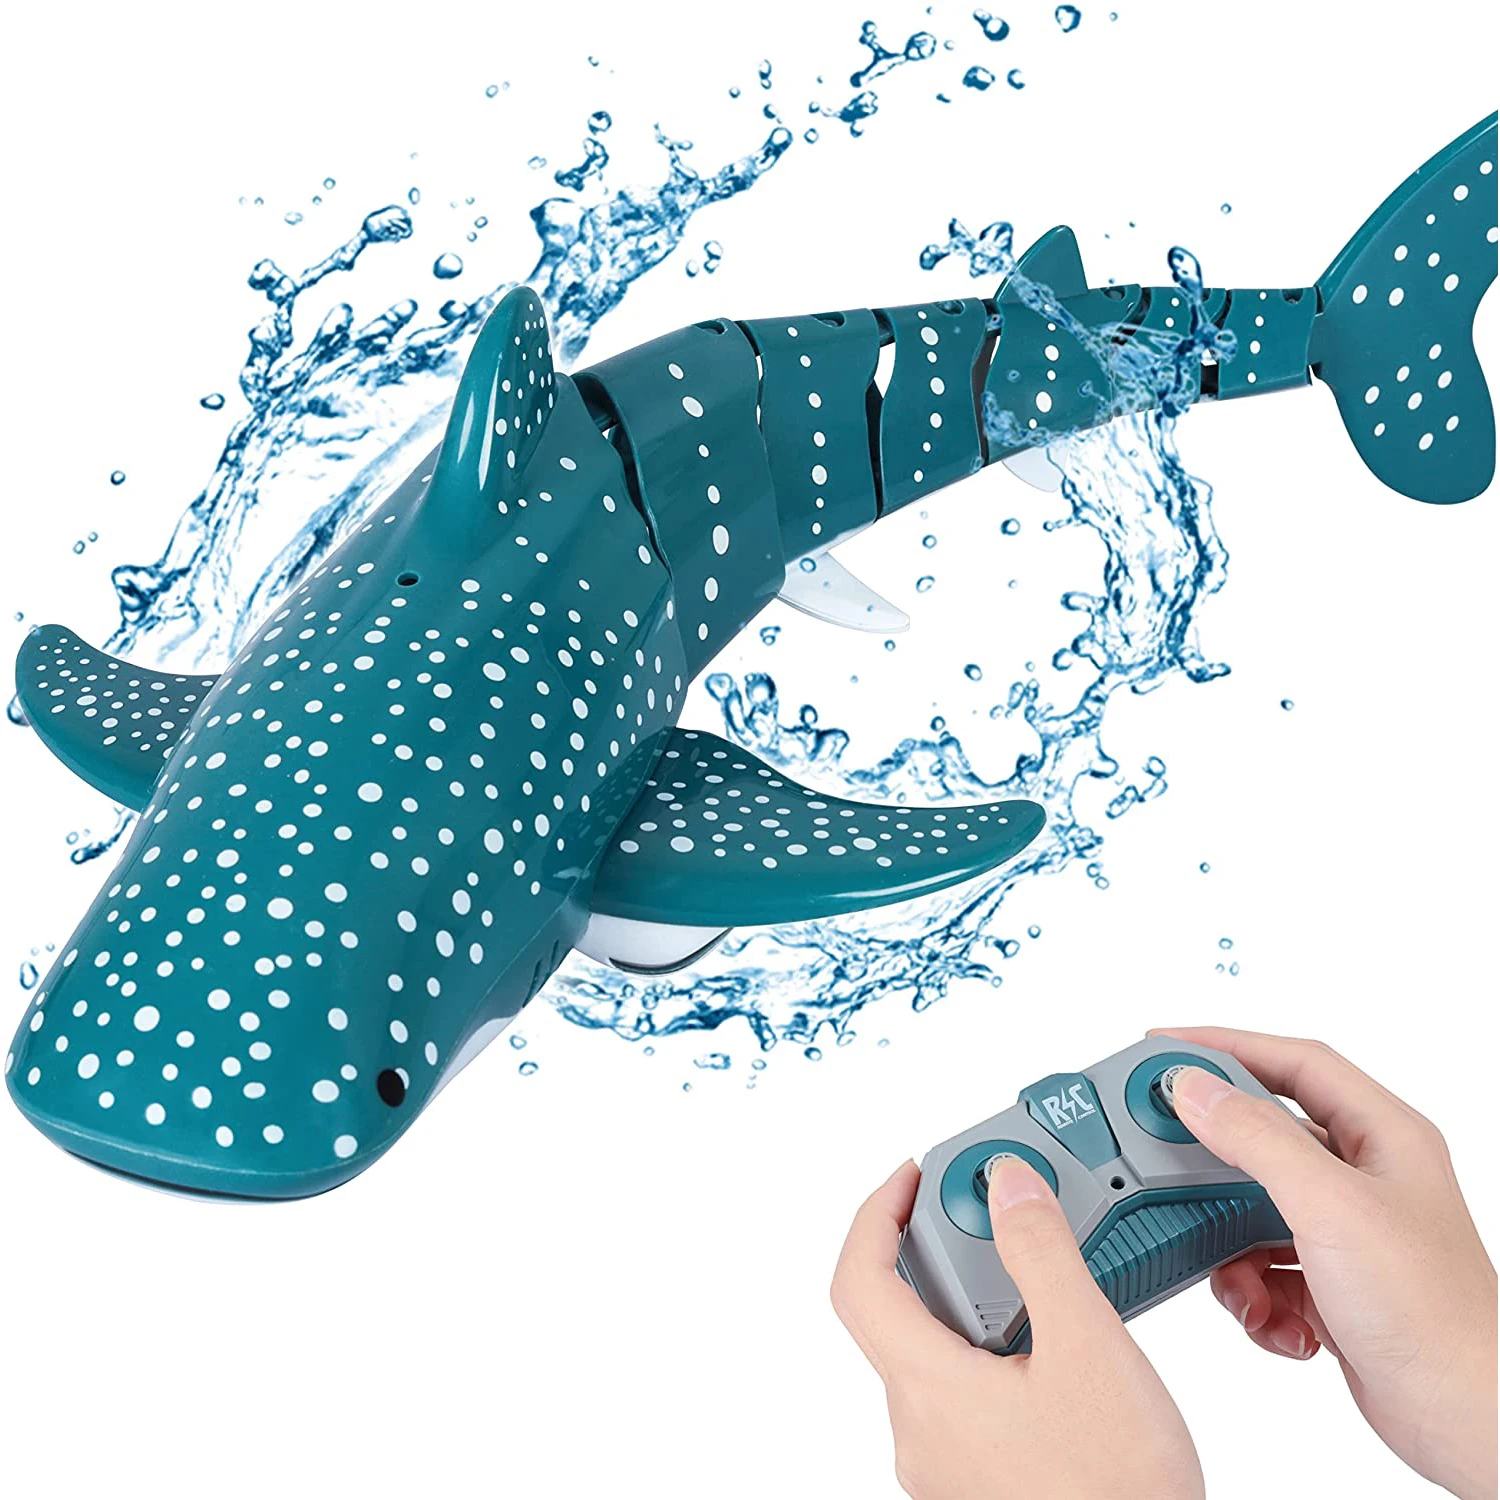 

RC Whale Shark Toys 2.4GHz RC Fish Boat Electric Animal Water Toy for Swimming Pool Lake Remote Control Shark Toy Boat for Kids